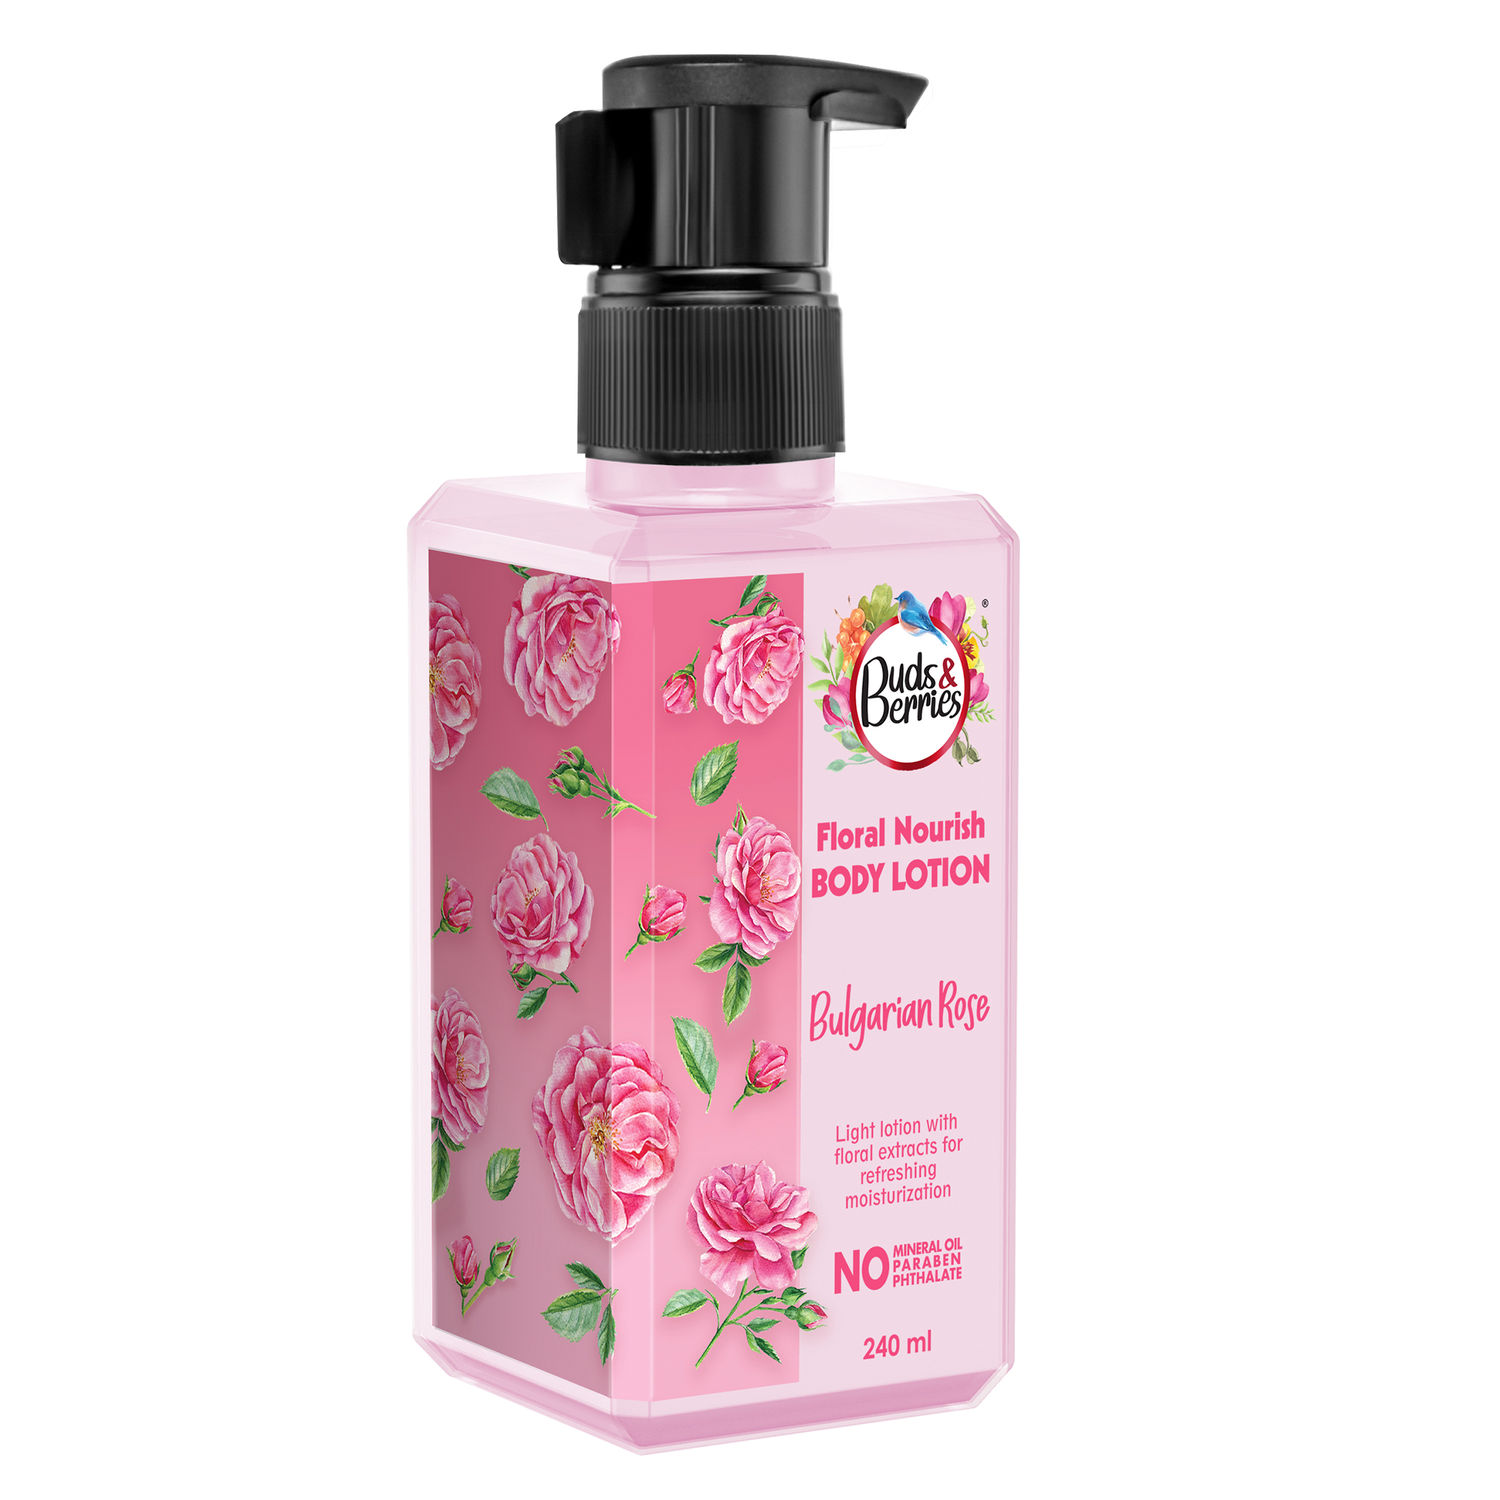 Buy Buds & Berries Floral Nourish Bulgarian Rose Body Lotion for Refreshing Moisturization | No Mineral Oil, No Paraben, No Phthalate (240 ml) - Purplle